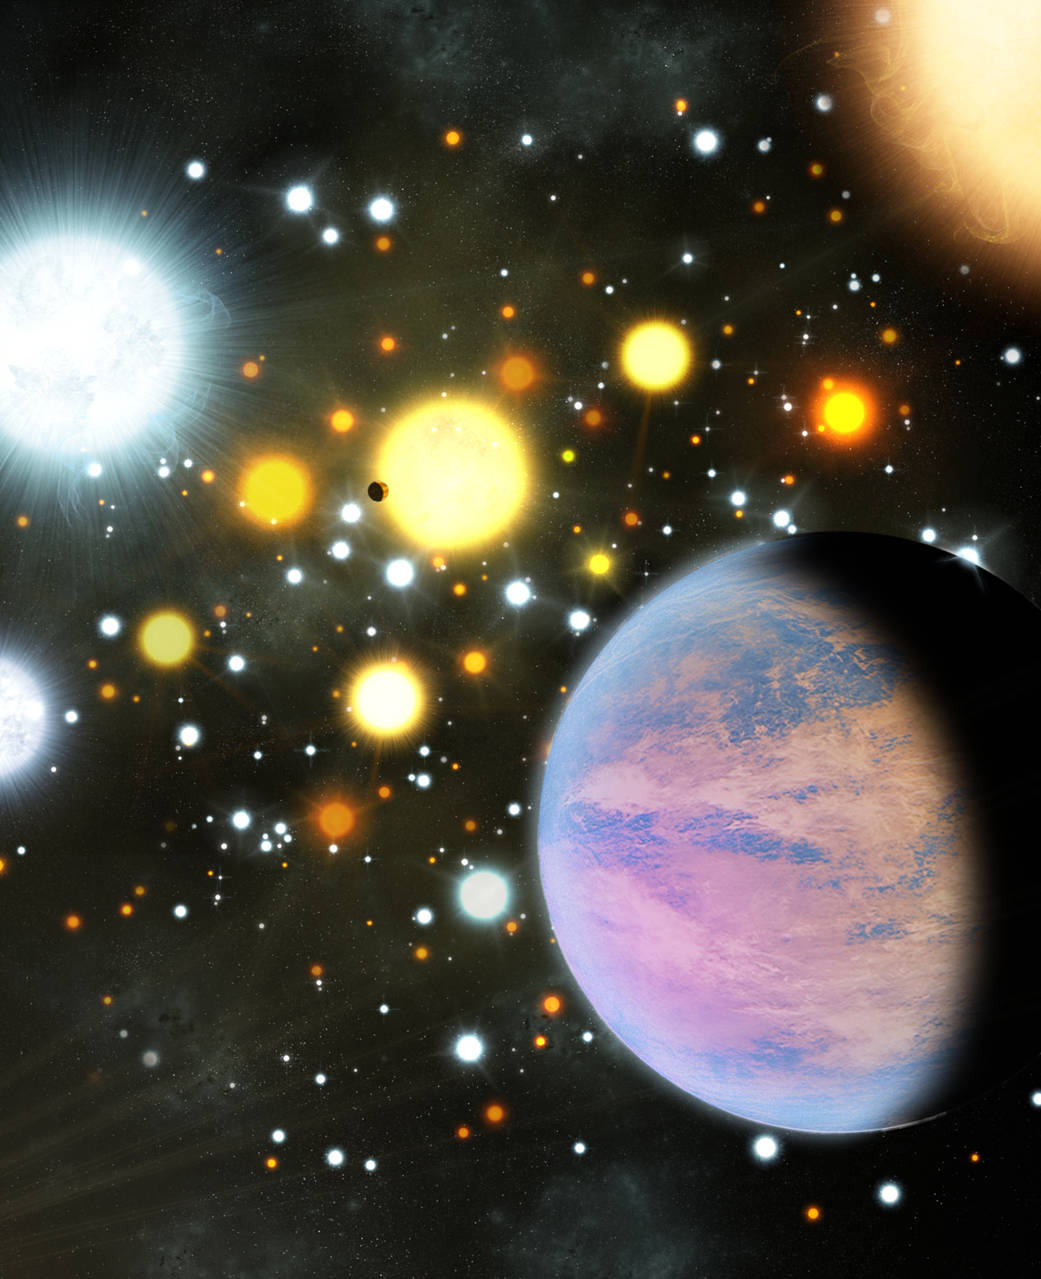 In the star cluster NGC 6811, astronomers have found two planets smaller than Neptune orbiting sun-like stars. 